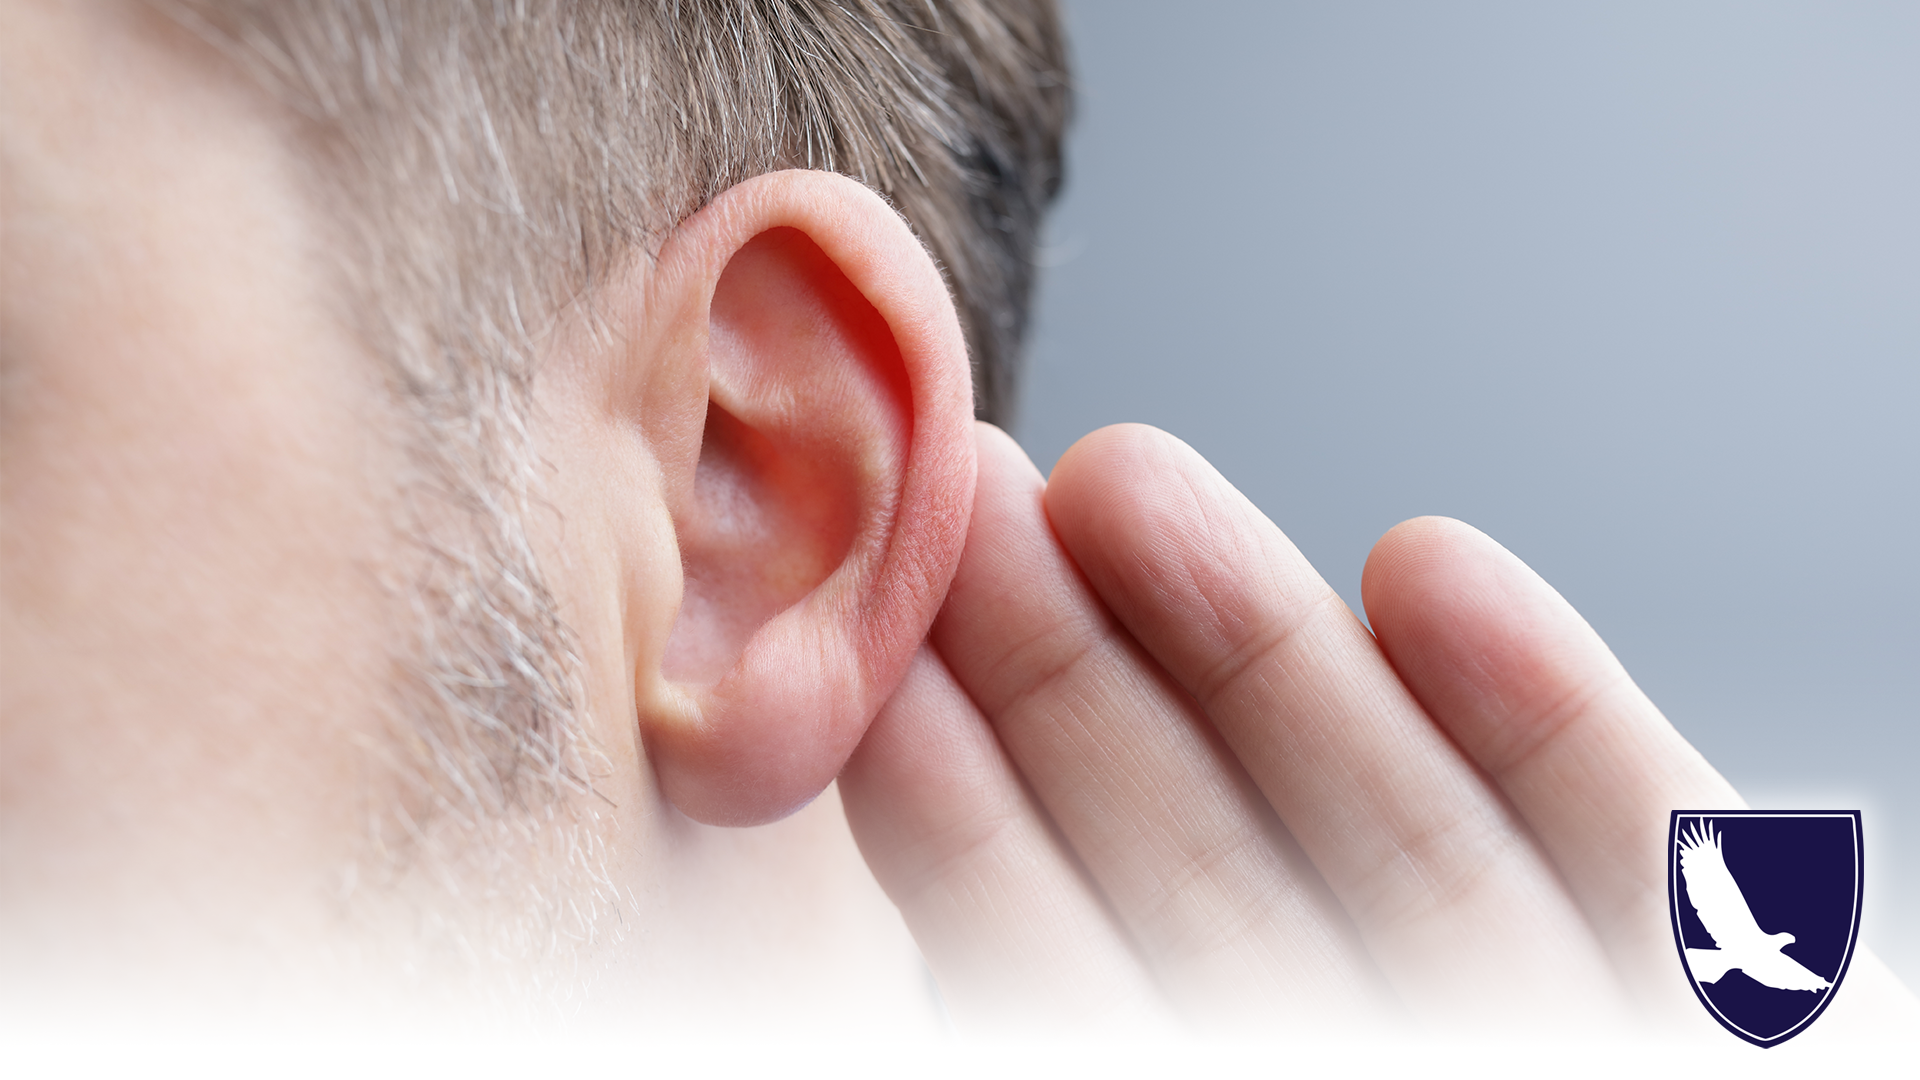 CAN I QUALIFY FOR SOCIAL SECURITY DISABILITY OR SSI DUE TO MY HEARING LOSS